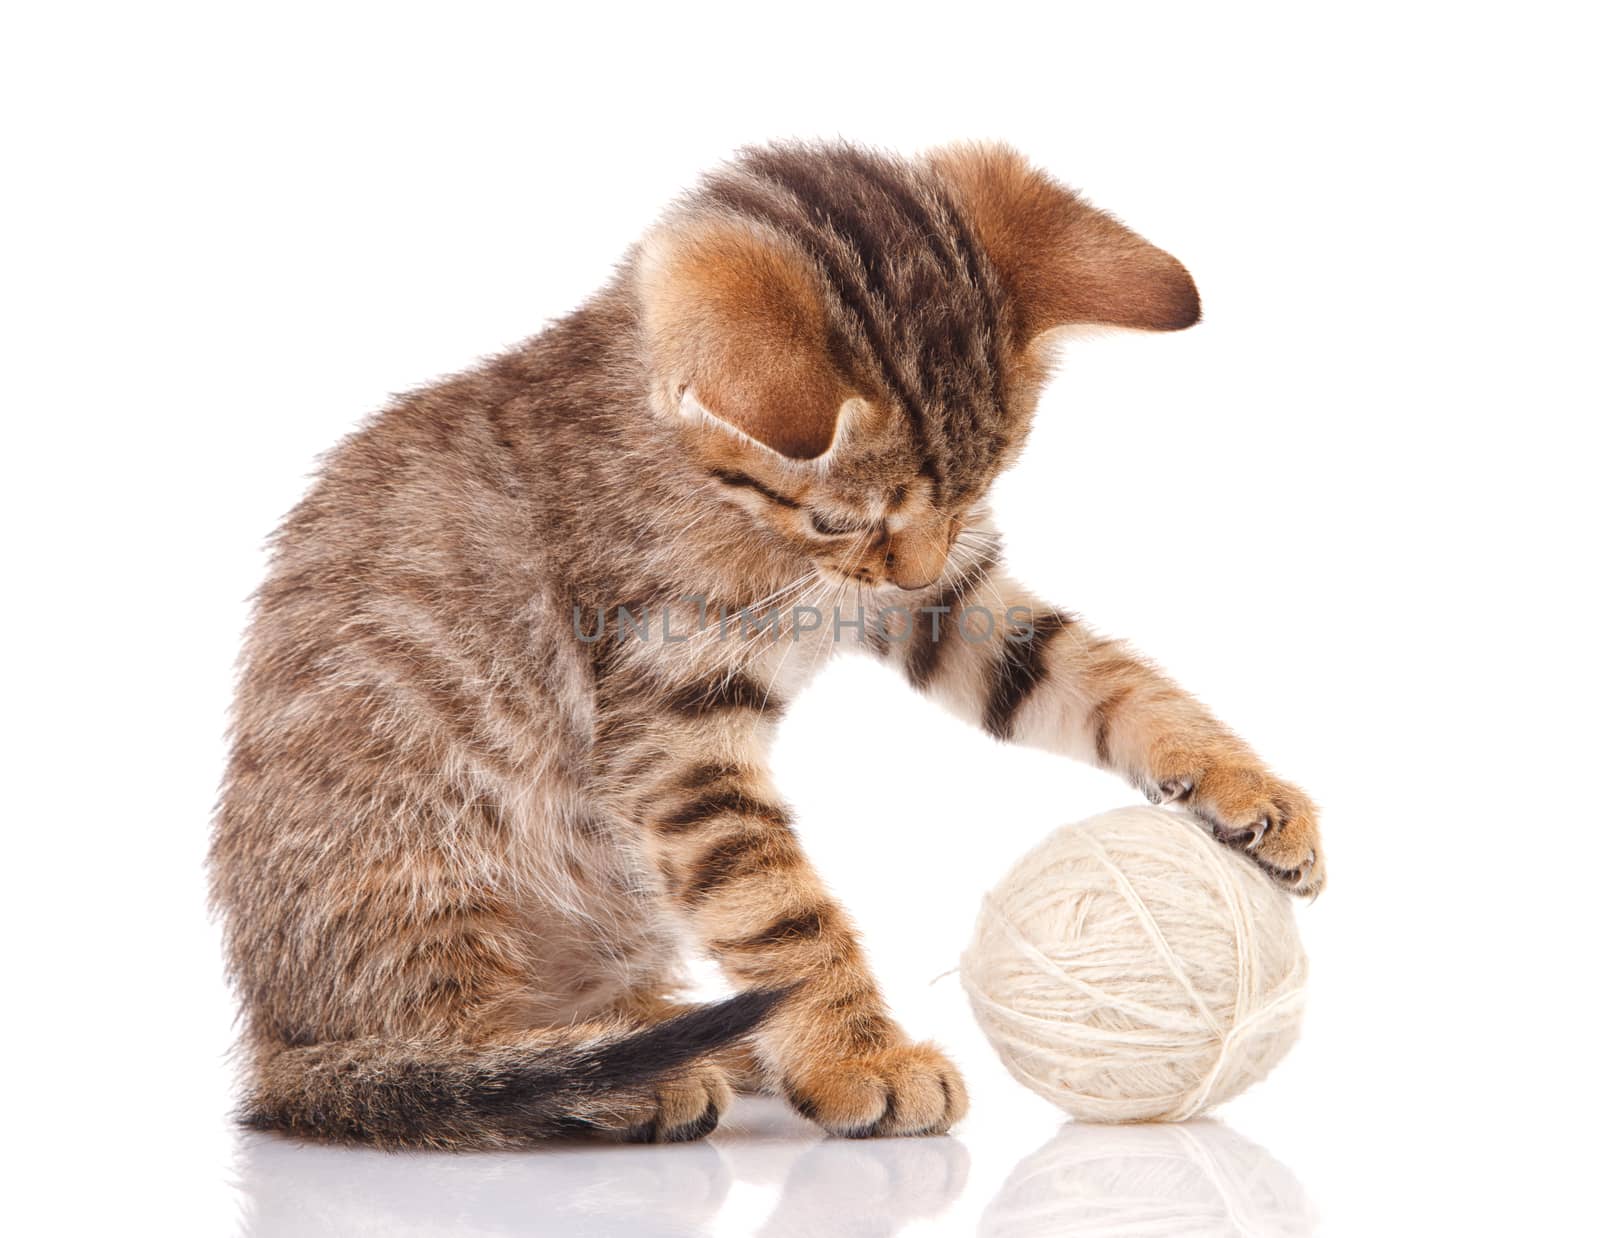 playful tabby kitten with white ball on white background